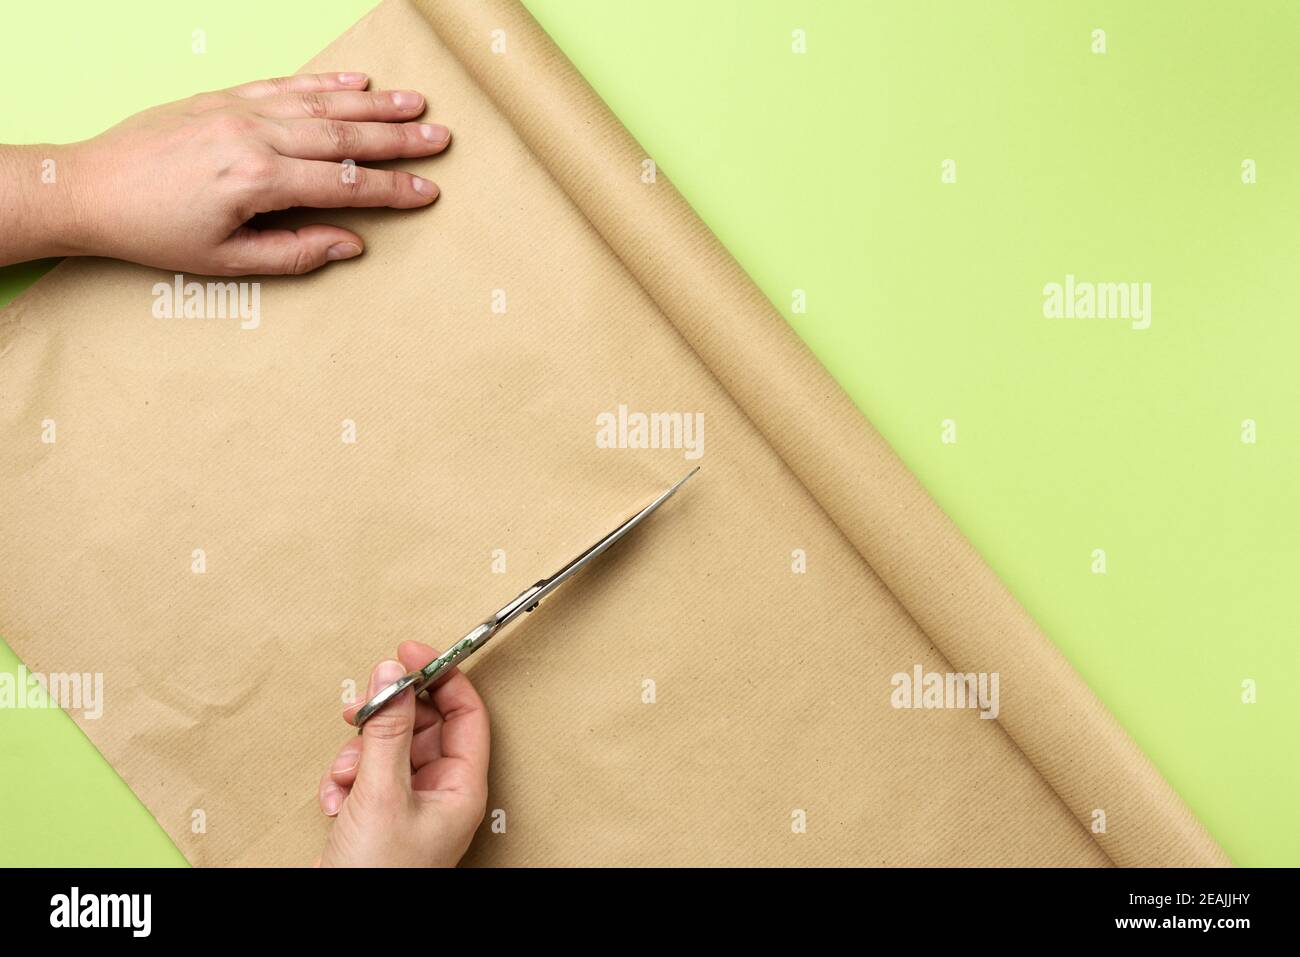 female hand cuts a roll of brown paper with iron scissors on a green background Stock Photo